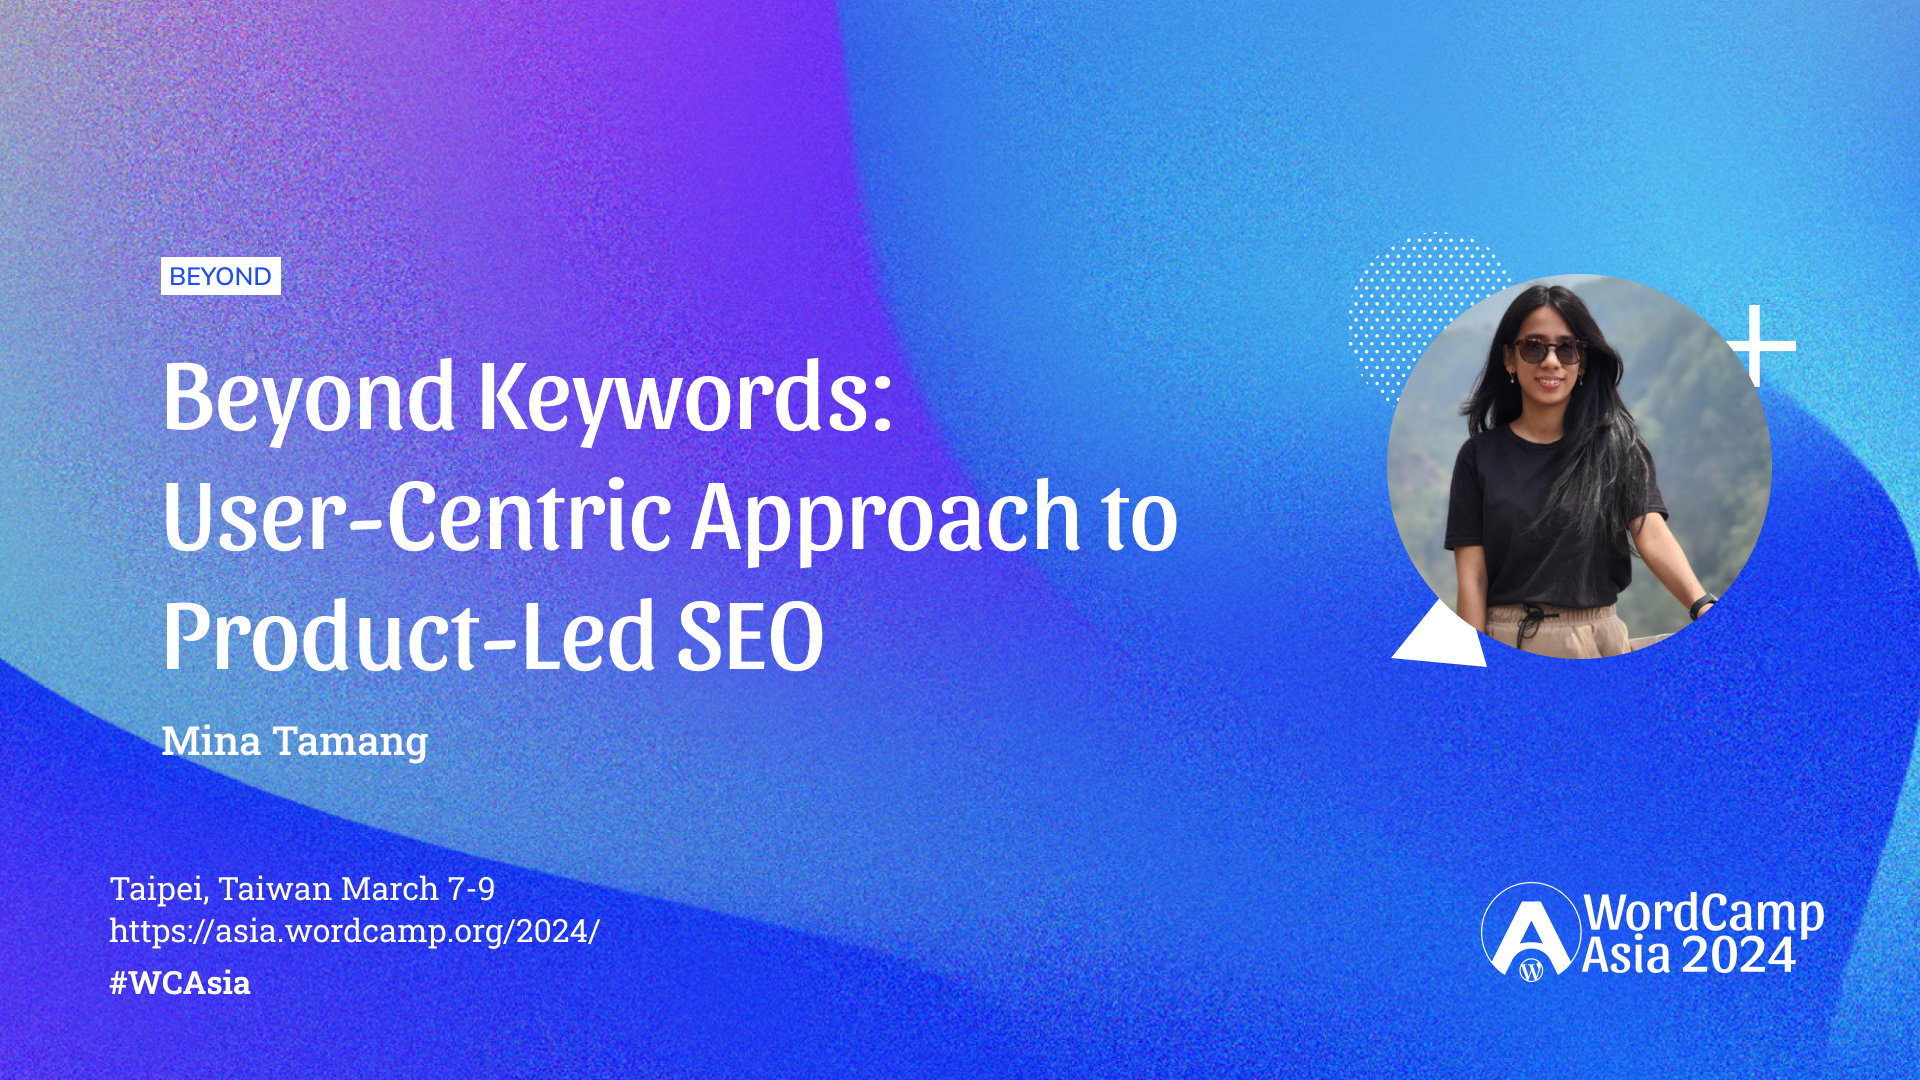 Beyond Keywords: User-Centric Approach to Product-Led SEO